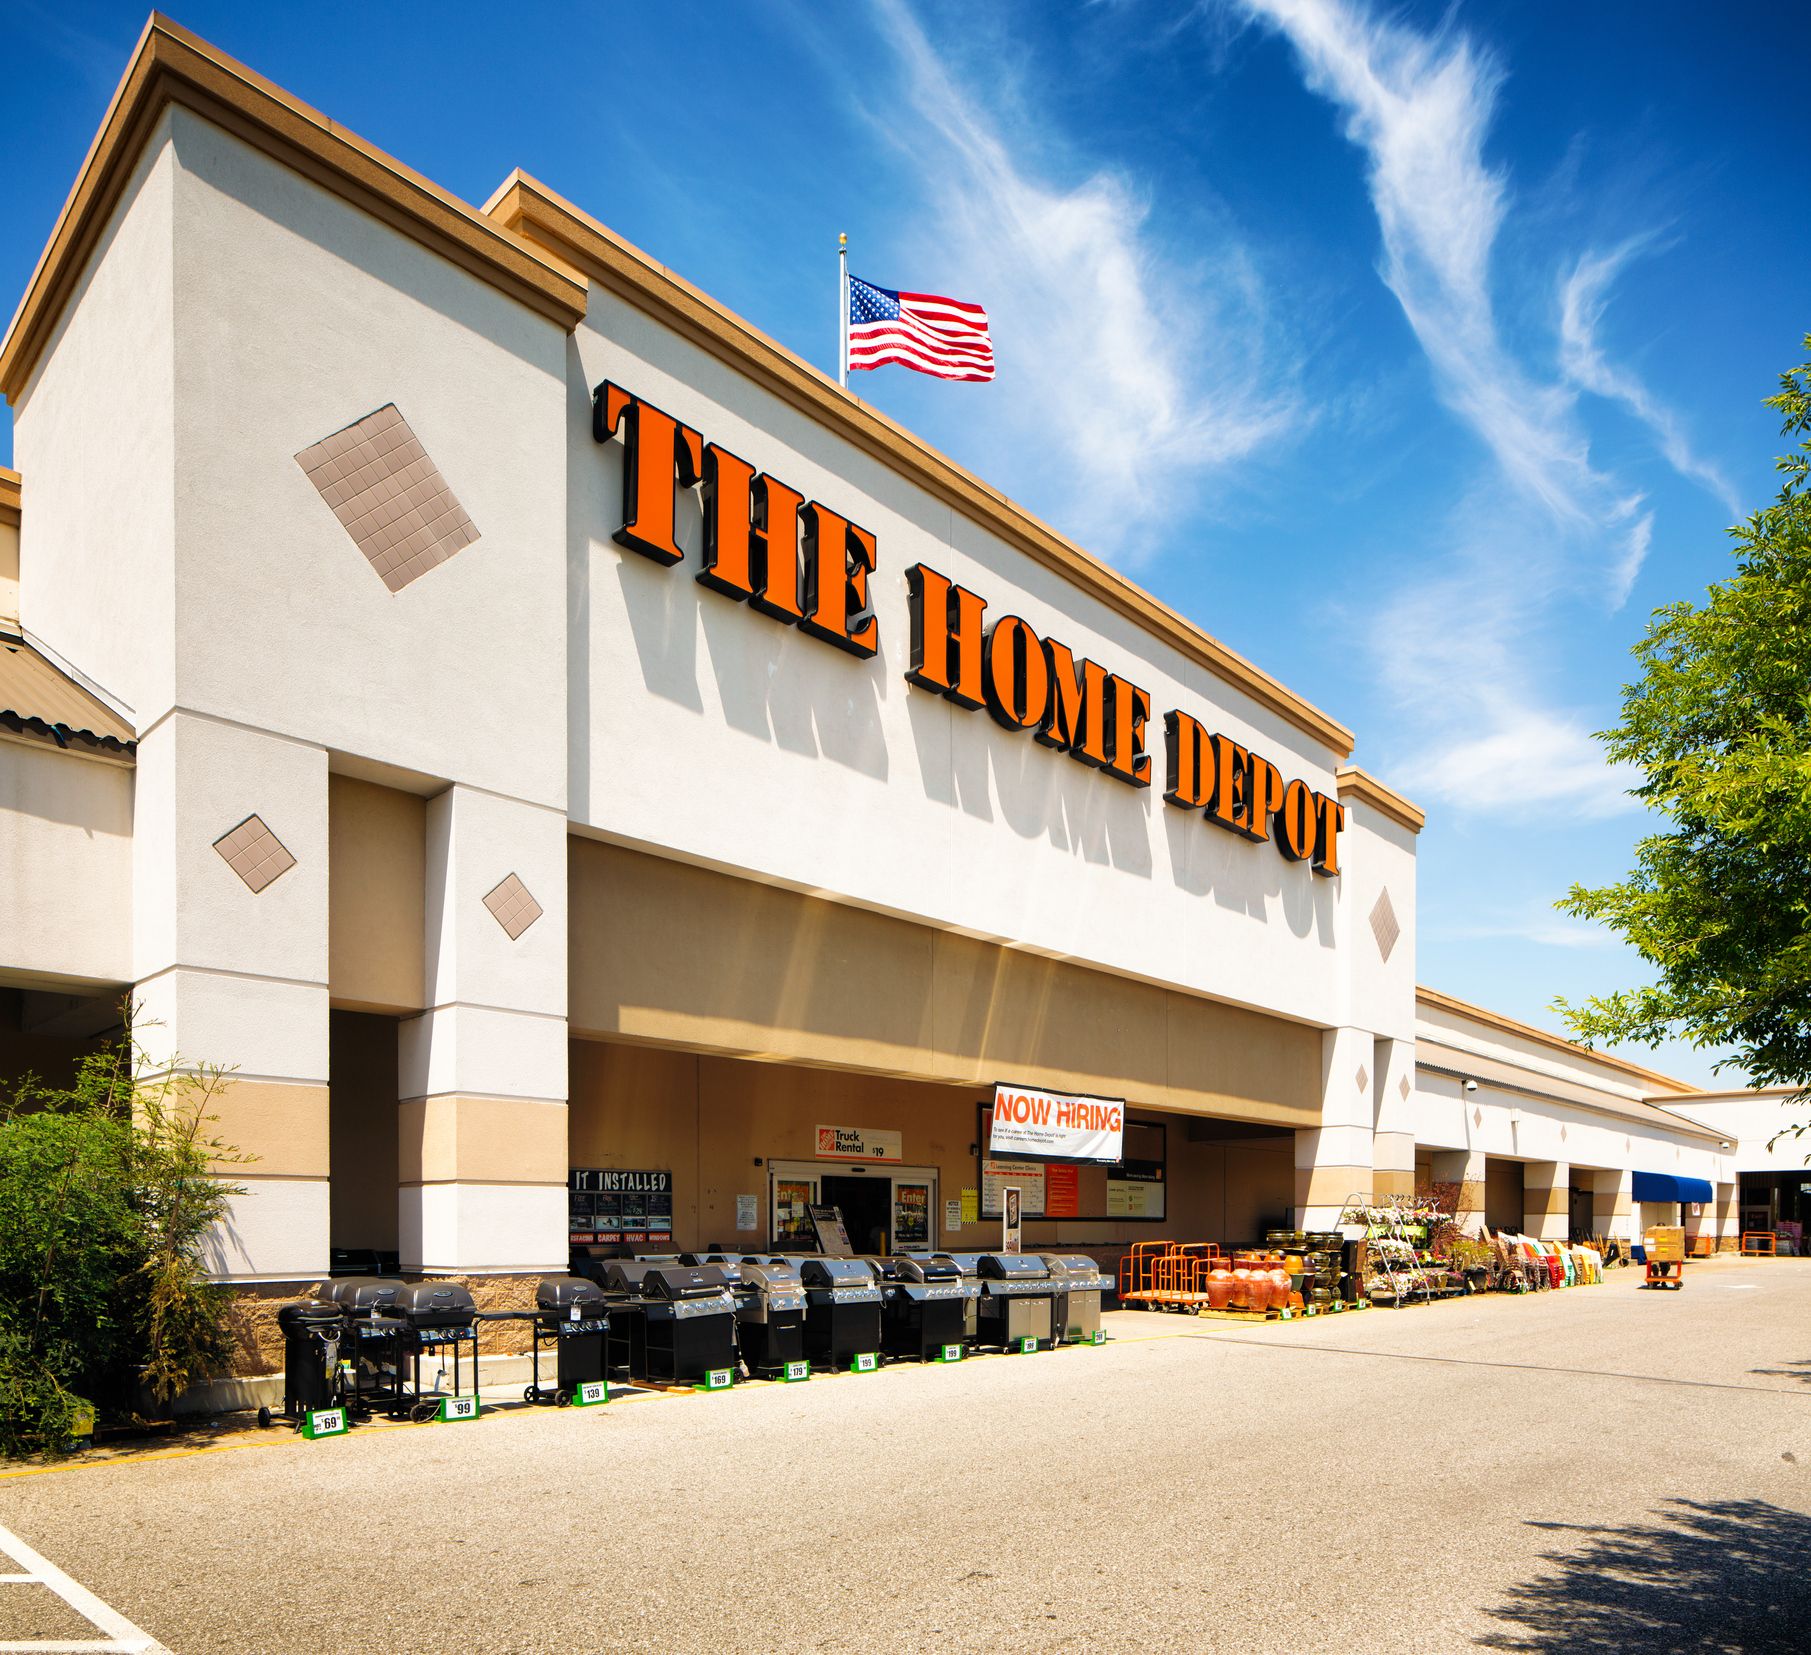 Is Home Depot Open on 4th of July 2023? - Home Depot July 4 Hours